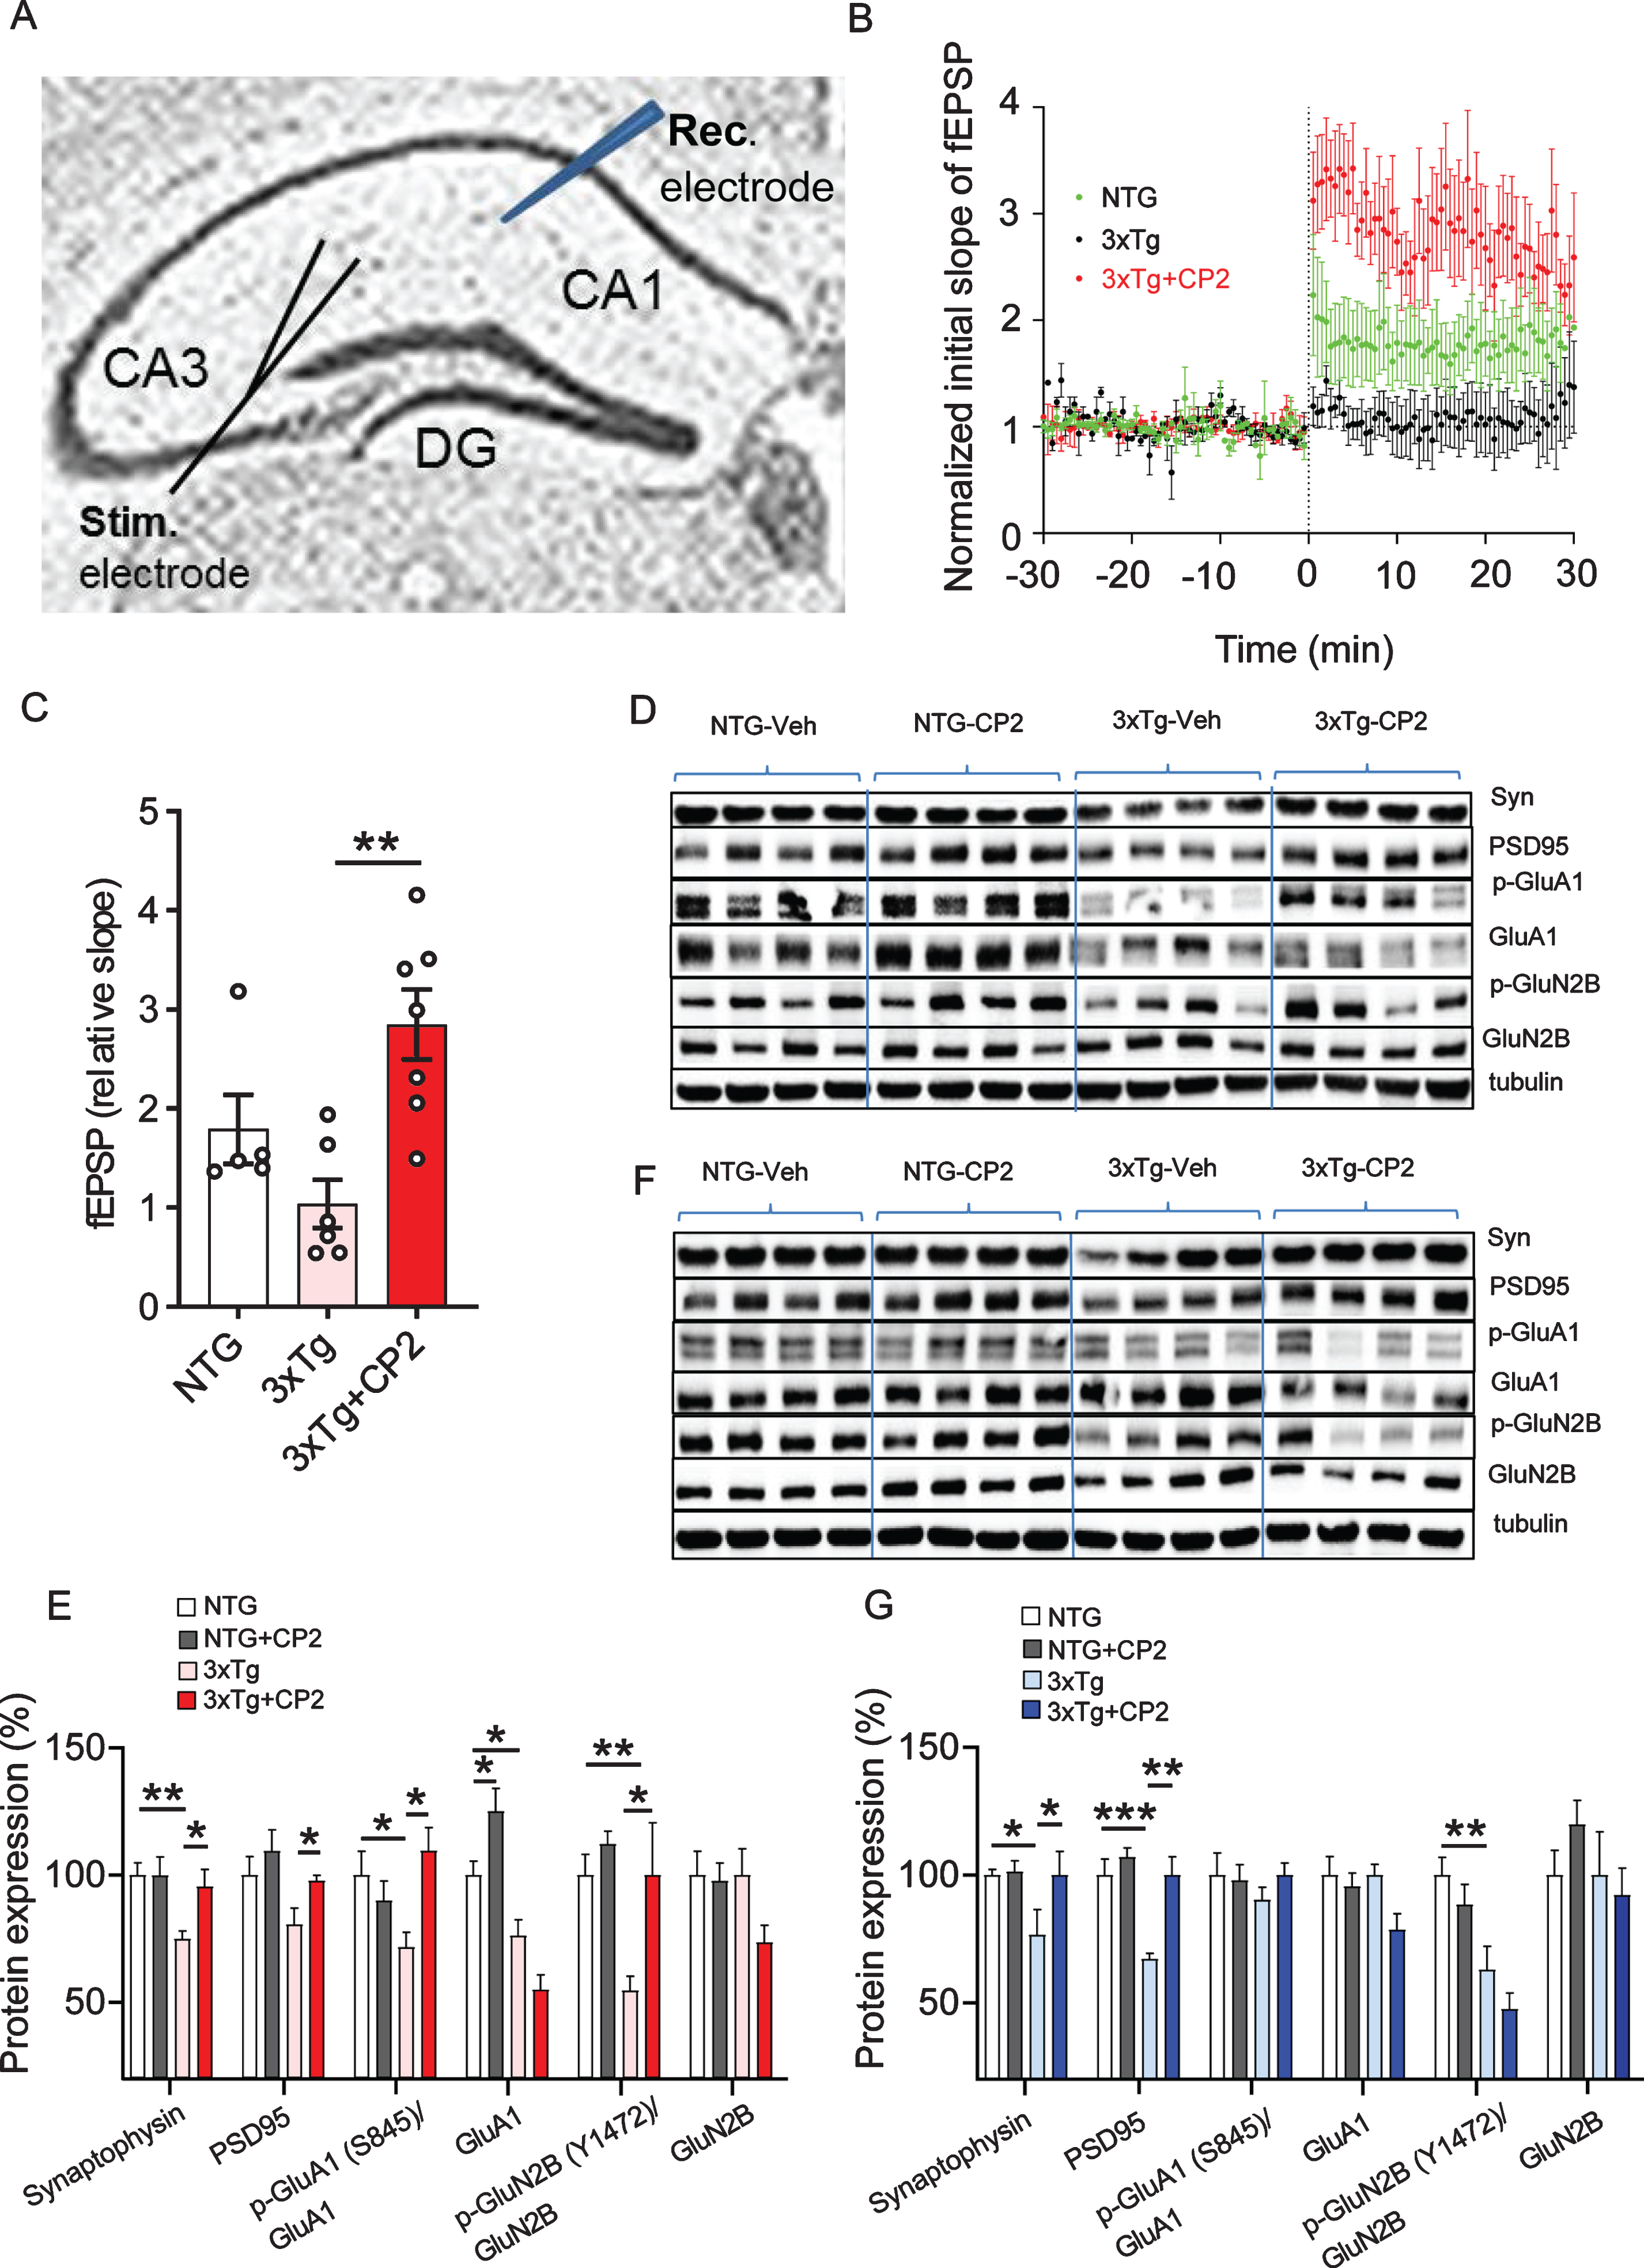 CP2 treatment improves synaptic function and LTP in 3xTg-AD mice. A) Experimental setup for stimulation-evoked local field potential (LFP) measurement in the hippocampal acute slice. The stimulation (Stim.) electrode was placed at the Schaffer collaterals and the recording (Rec.) electrode was placed at the striatum radiatum in the CA1 region. To induce LTP, three tetanic stimulations (100 Hz, 60μs-pulse width for 1 s) were applied with 3-s intervals. In the slice, LTP was induced and maintained over 30–50 min. Slope of EPSPs was measured and results normalized to the average value established during the 30 min baseline period. Recording continued for at least 60 min following a tetanic stimulation and the first 30 min was used to calculate the LTP. B) CP2 treatment improves LTP formation in CP2-treated 3xTg-AD female mice. Traces represent mean±SEM per time. N= 2-3 slices from 3-5 mice per group. C) LTP intensity in CP2-treated female 3xTg-AD mice compared to vehicle-treated counterparts at 30 min after the stimulation. N= 2-3 slices from 3-5 mice per group. D) Representative western blot images of protein markers involved in synaptic function of dendritic spines in the brain tissue of CP2- and vehicle-treated female 3xTg-AD mice. N= 4–7 mice per group. E) Quantification of western blot data from (D) showing a percent of changes in protein expression after CP2 treatment in NTG and 3xTg-AD mice, relative to the levels in vehicle-treated NTG counterparts. Significant increase was observed in levels of synaptophysin (Syn), PSD95, and GluA1 and GluN2B phosphorylation. No changes were detected in total levels of GluA1 and GluN2B. F) Representative western blot images of protein markers involved in synaptic function of dendritic spines in the brain tissue of CP2- and vehicle-treated male 3xTg-AD mice. N= 4–7 mice per group. G) Quantification of western blot data from (F) showing a percent of changes in protein expression after CP2 treatment in NTG and 3xTg-AD mice, relative to the levels in vehicle-treated NTG counterparts. Significant increase was observed in levels of Syn and PSD95, with no improvement in GluN2B phosphorylation. Differences between individual groups were analyzed by one-way ANOVA, with Fisher‘s LSD post-hoc test. Data are presented as mean±SEM. *p < 0.05, **p < 0.01.